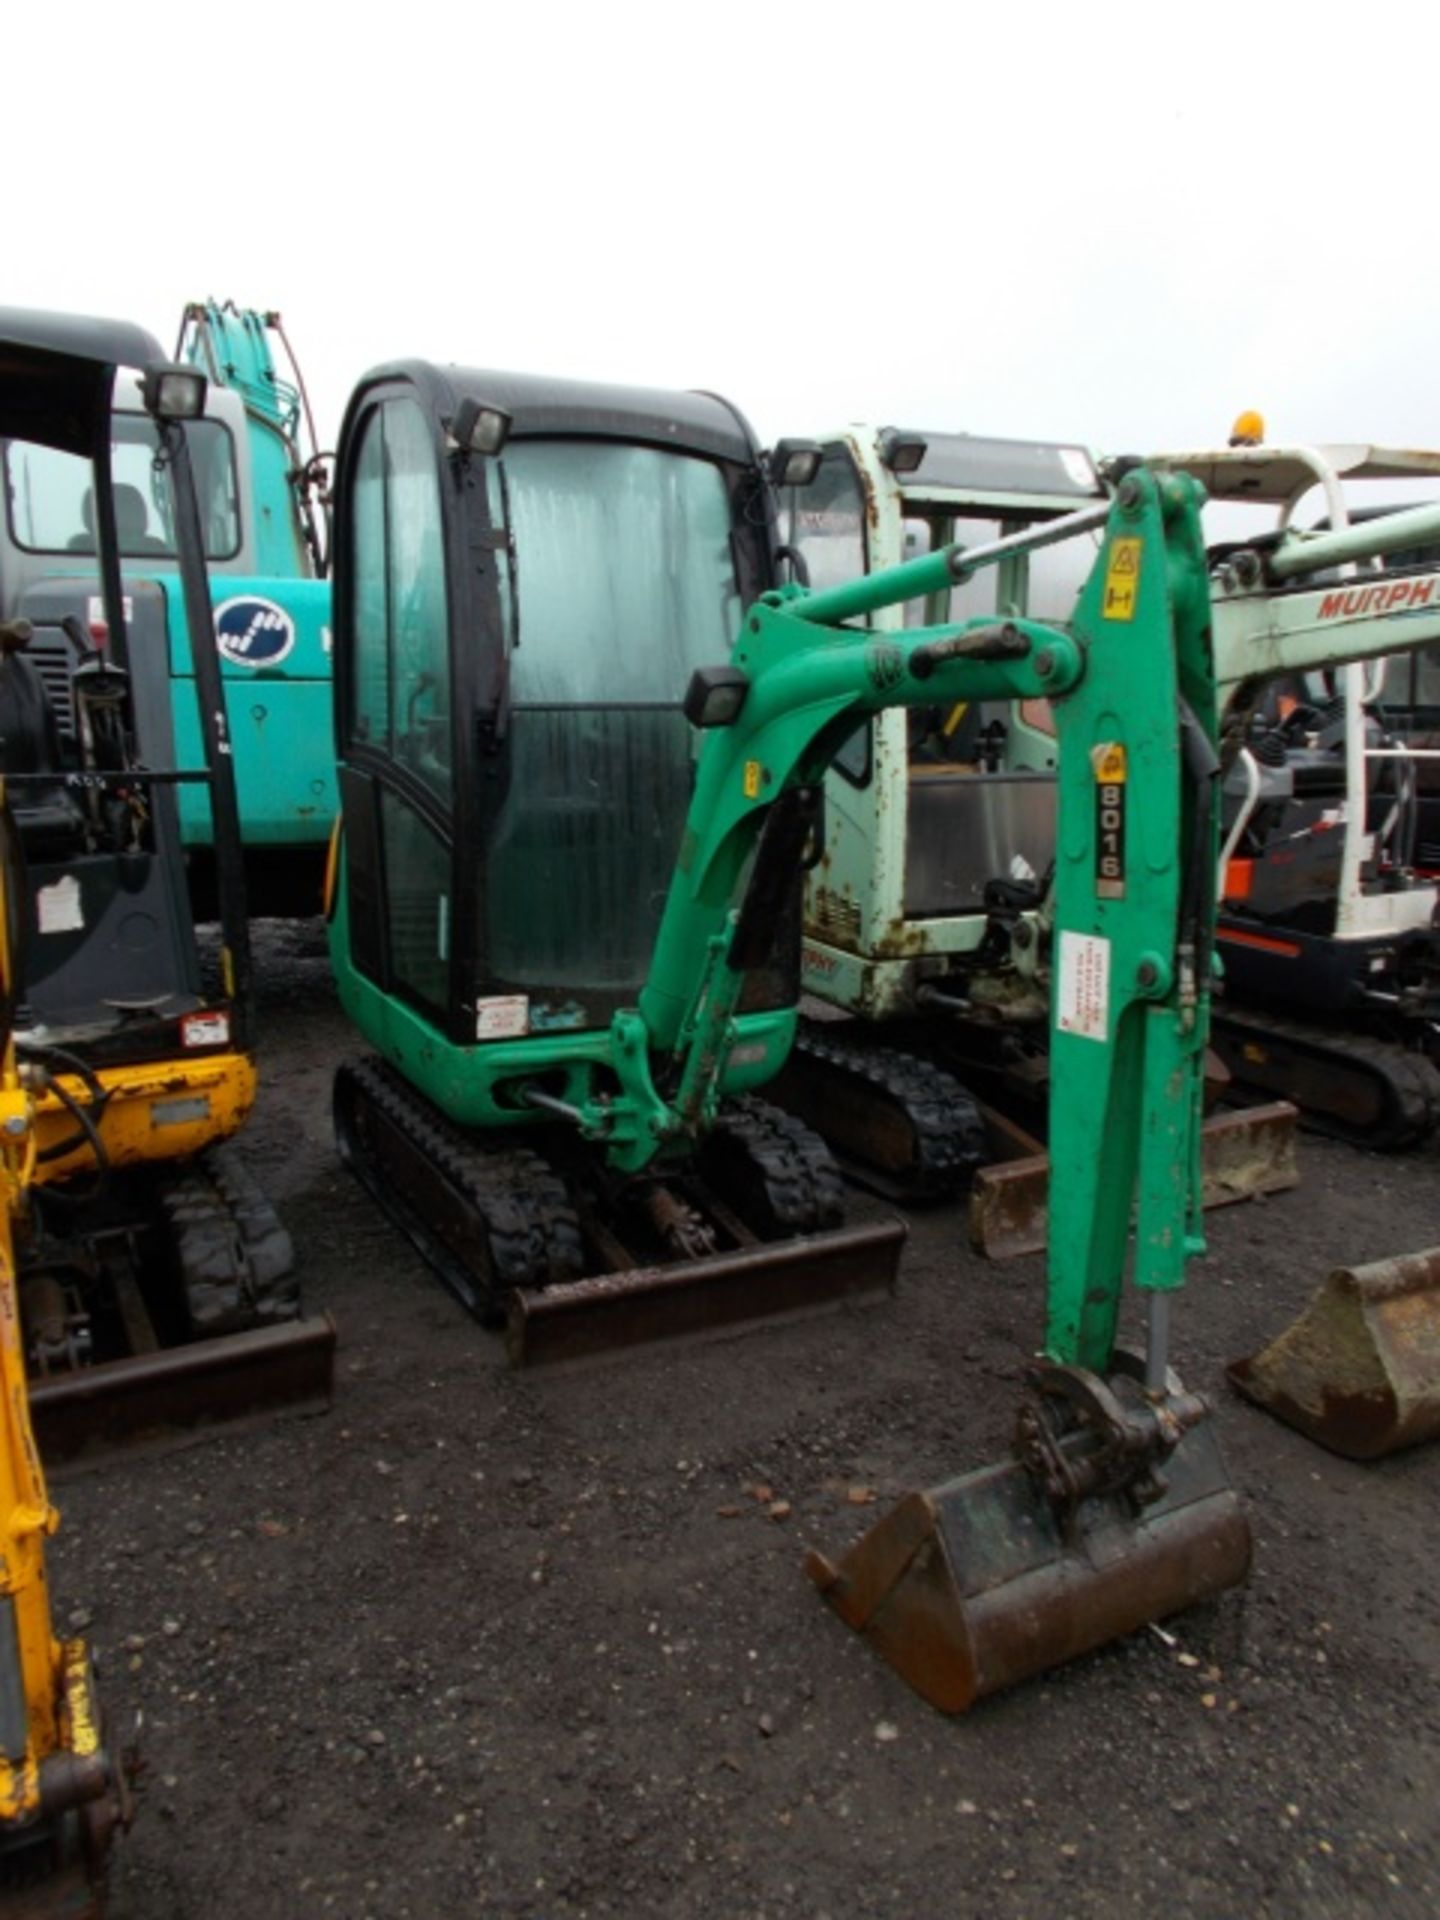 JCB 2007 801.6 rubber tracked mini excavator pipe blade & bucket (1922 rec hrs) RDD - Image 2 of 4